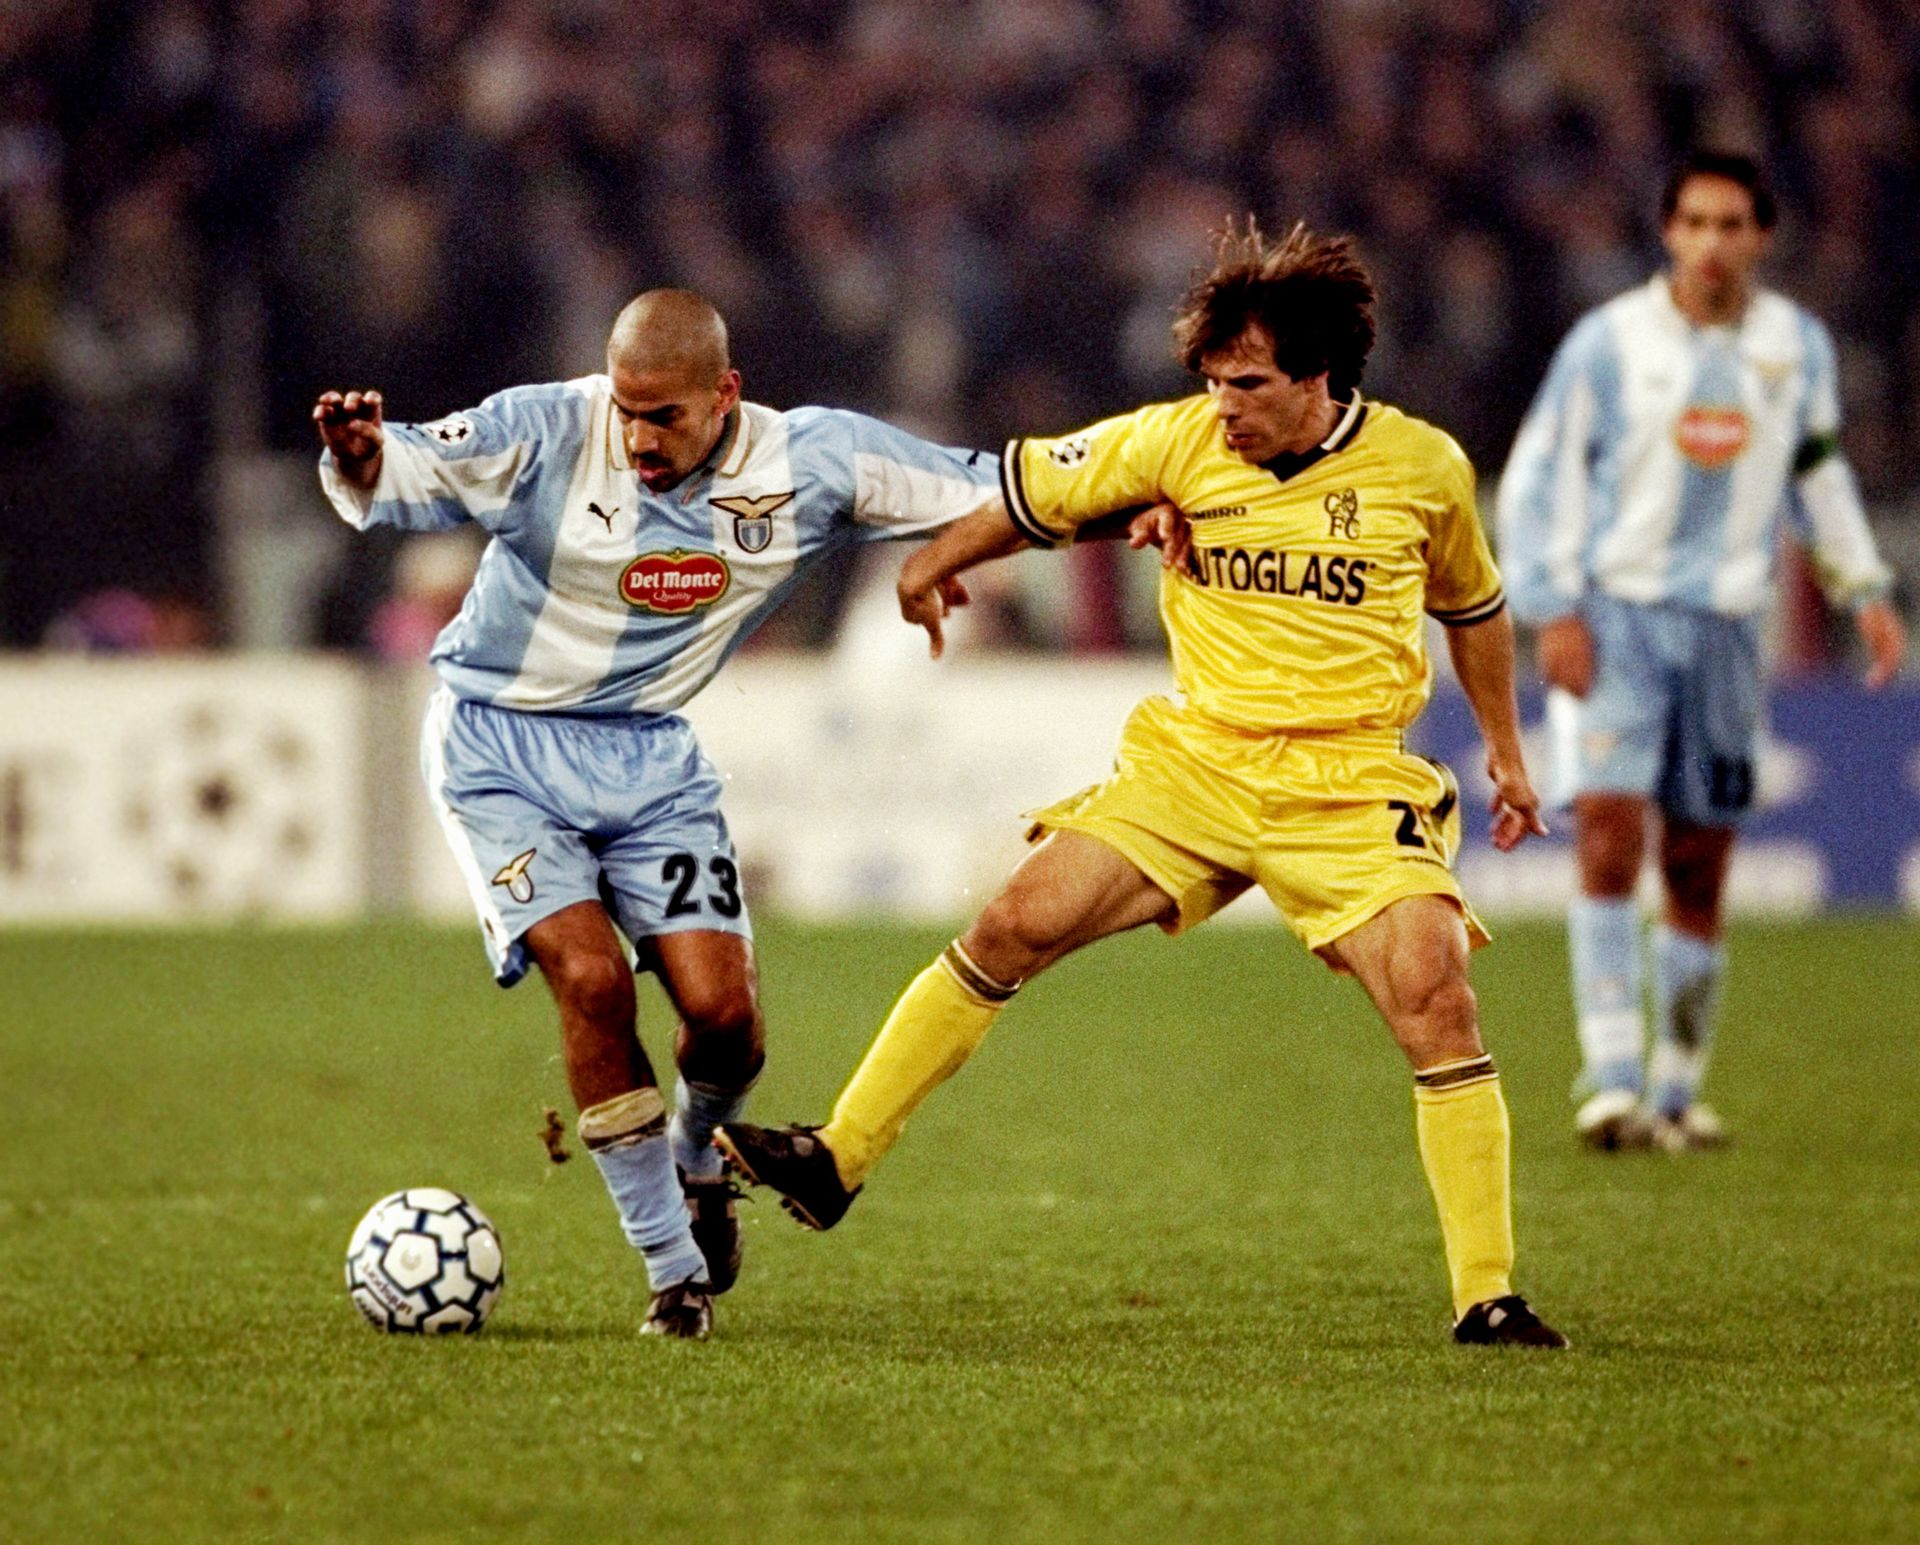 <p>                     Juan Sebastian Veron's best years were spent in Italy and the Argentine midfielder was one of Serie A's most sought-after stars in the late 1990s.                   </p>                                      <p>                     After successful spells at Sampdoria and Parma, Veron signed for Lazio in the summer of 1999 for €30 million (£18.1m) and helped the Rome-based club win Serie A the following season. After two years in the Italian capital, Veron moved to Manchester United in 2001.                   </p>